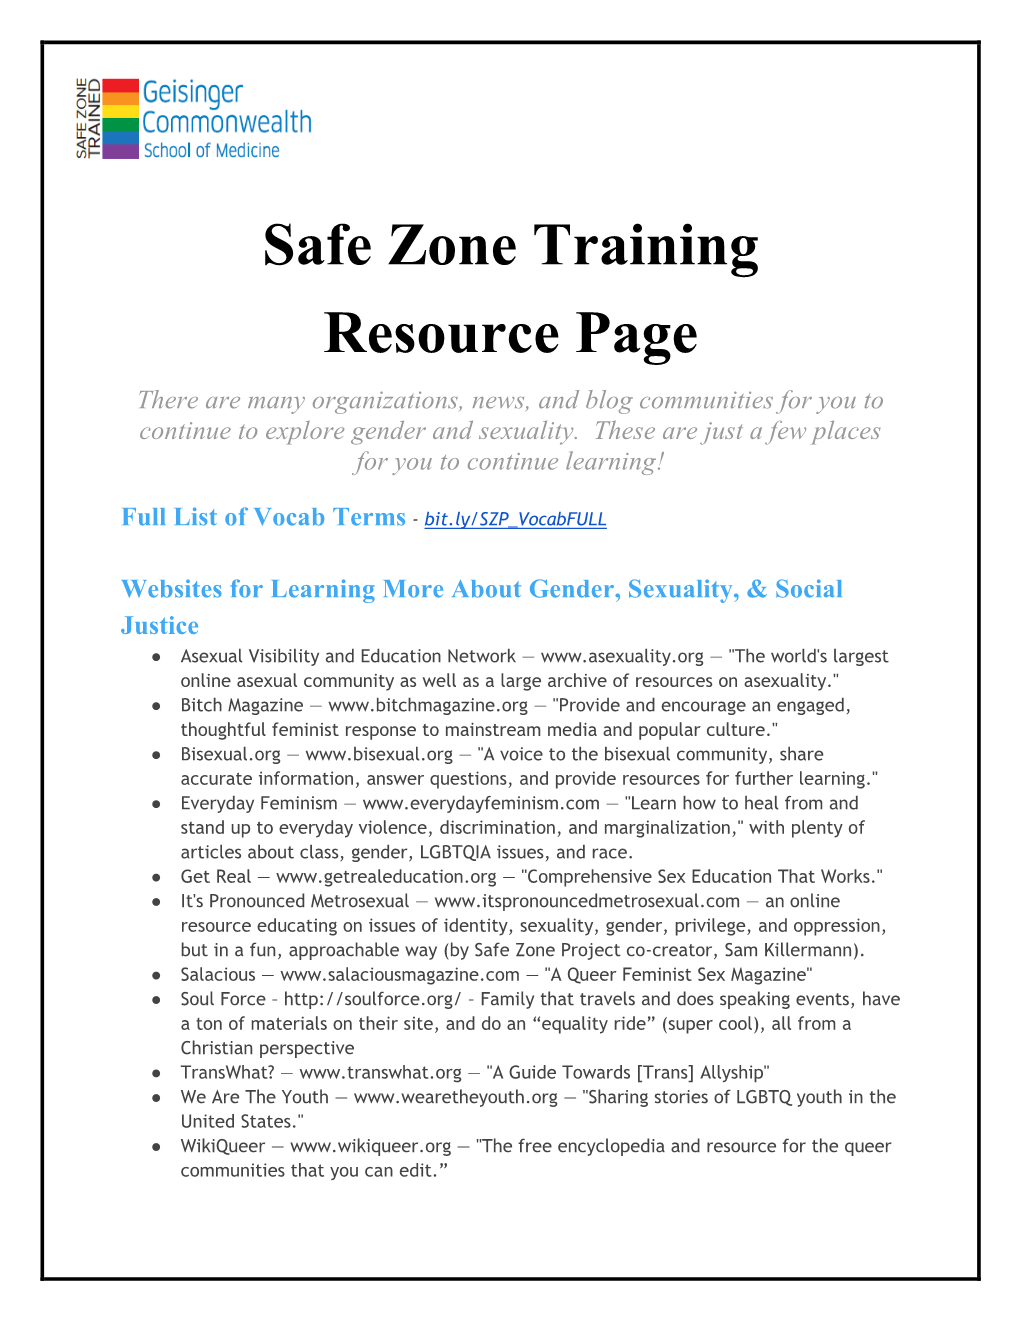 Safe Zone Training Resource Page